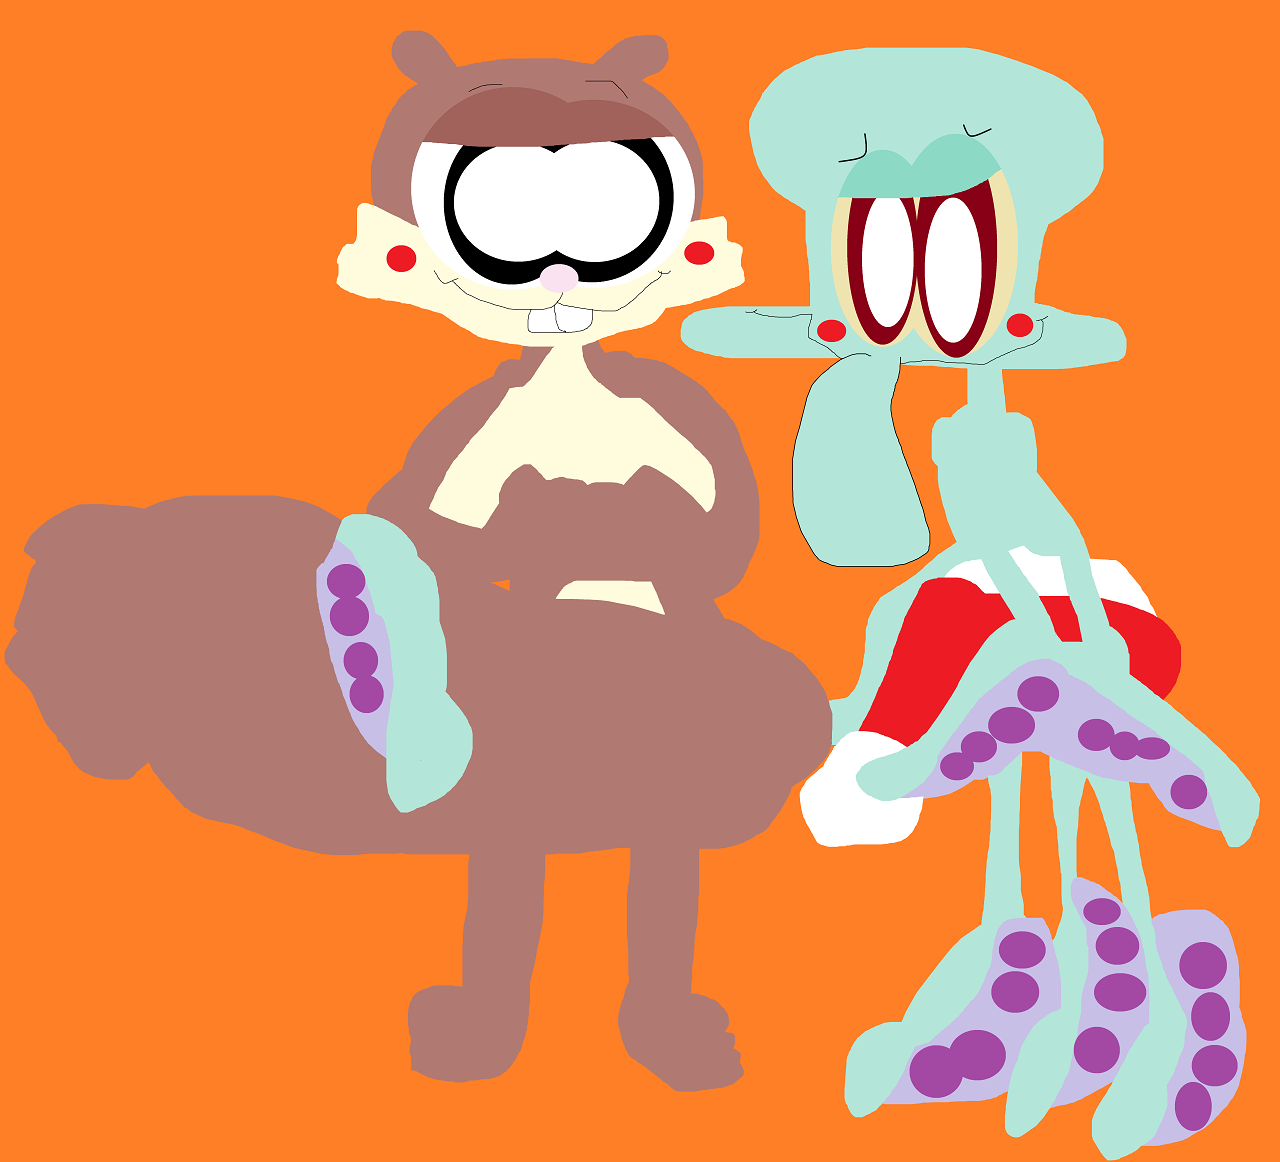 Squidward And Sandy's Christmas Cover Up by Falconlobo